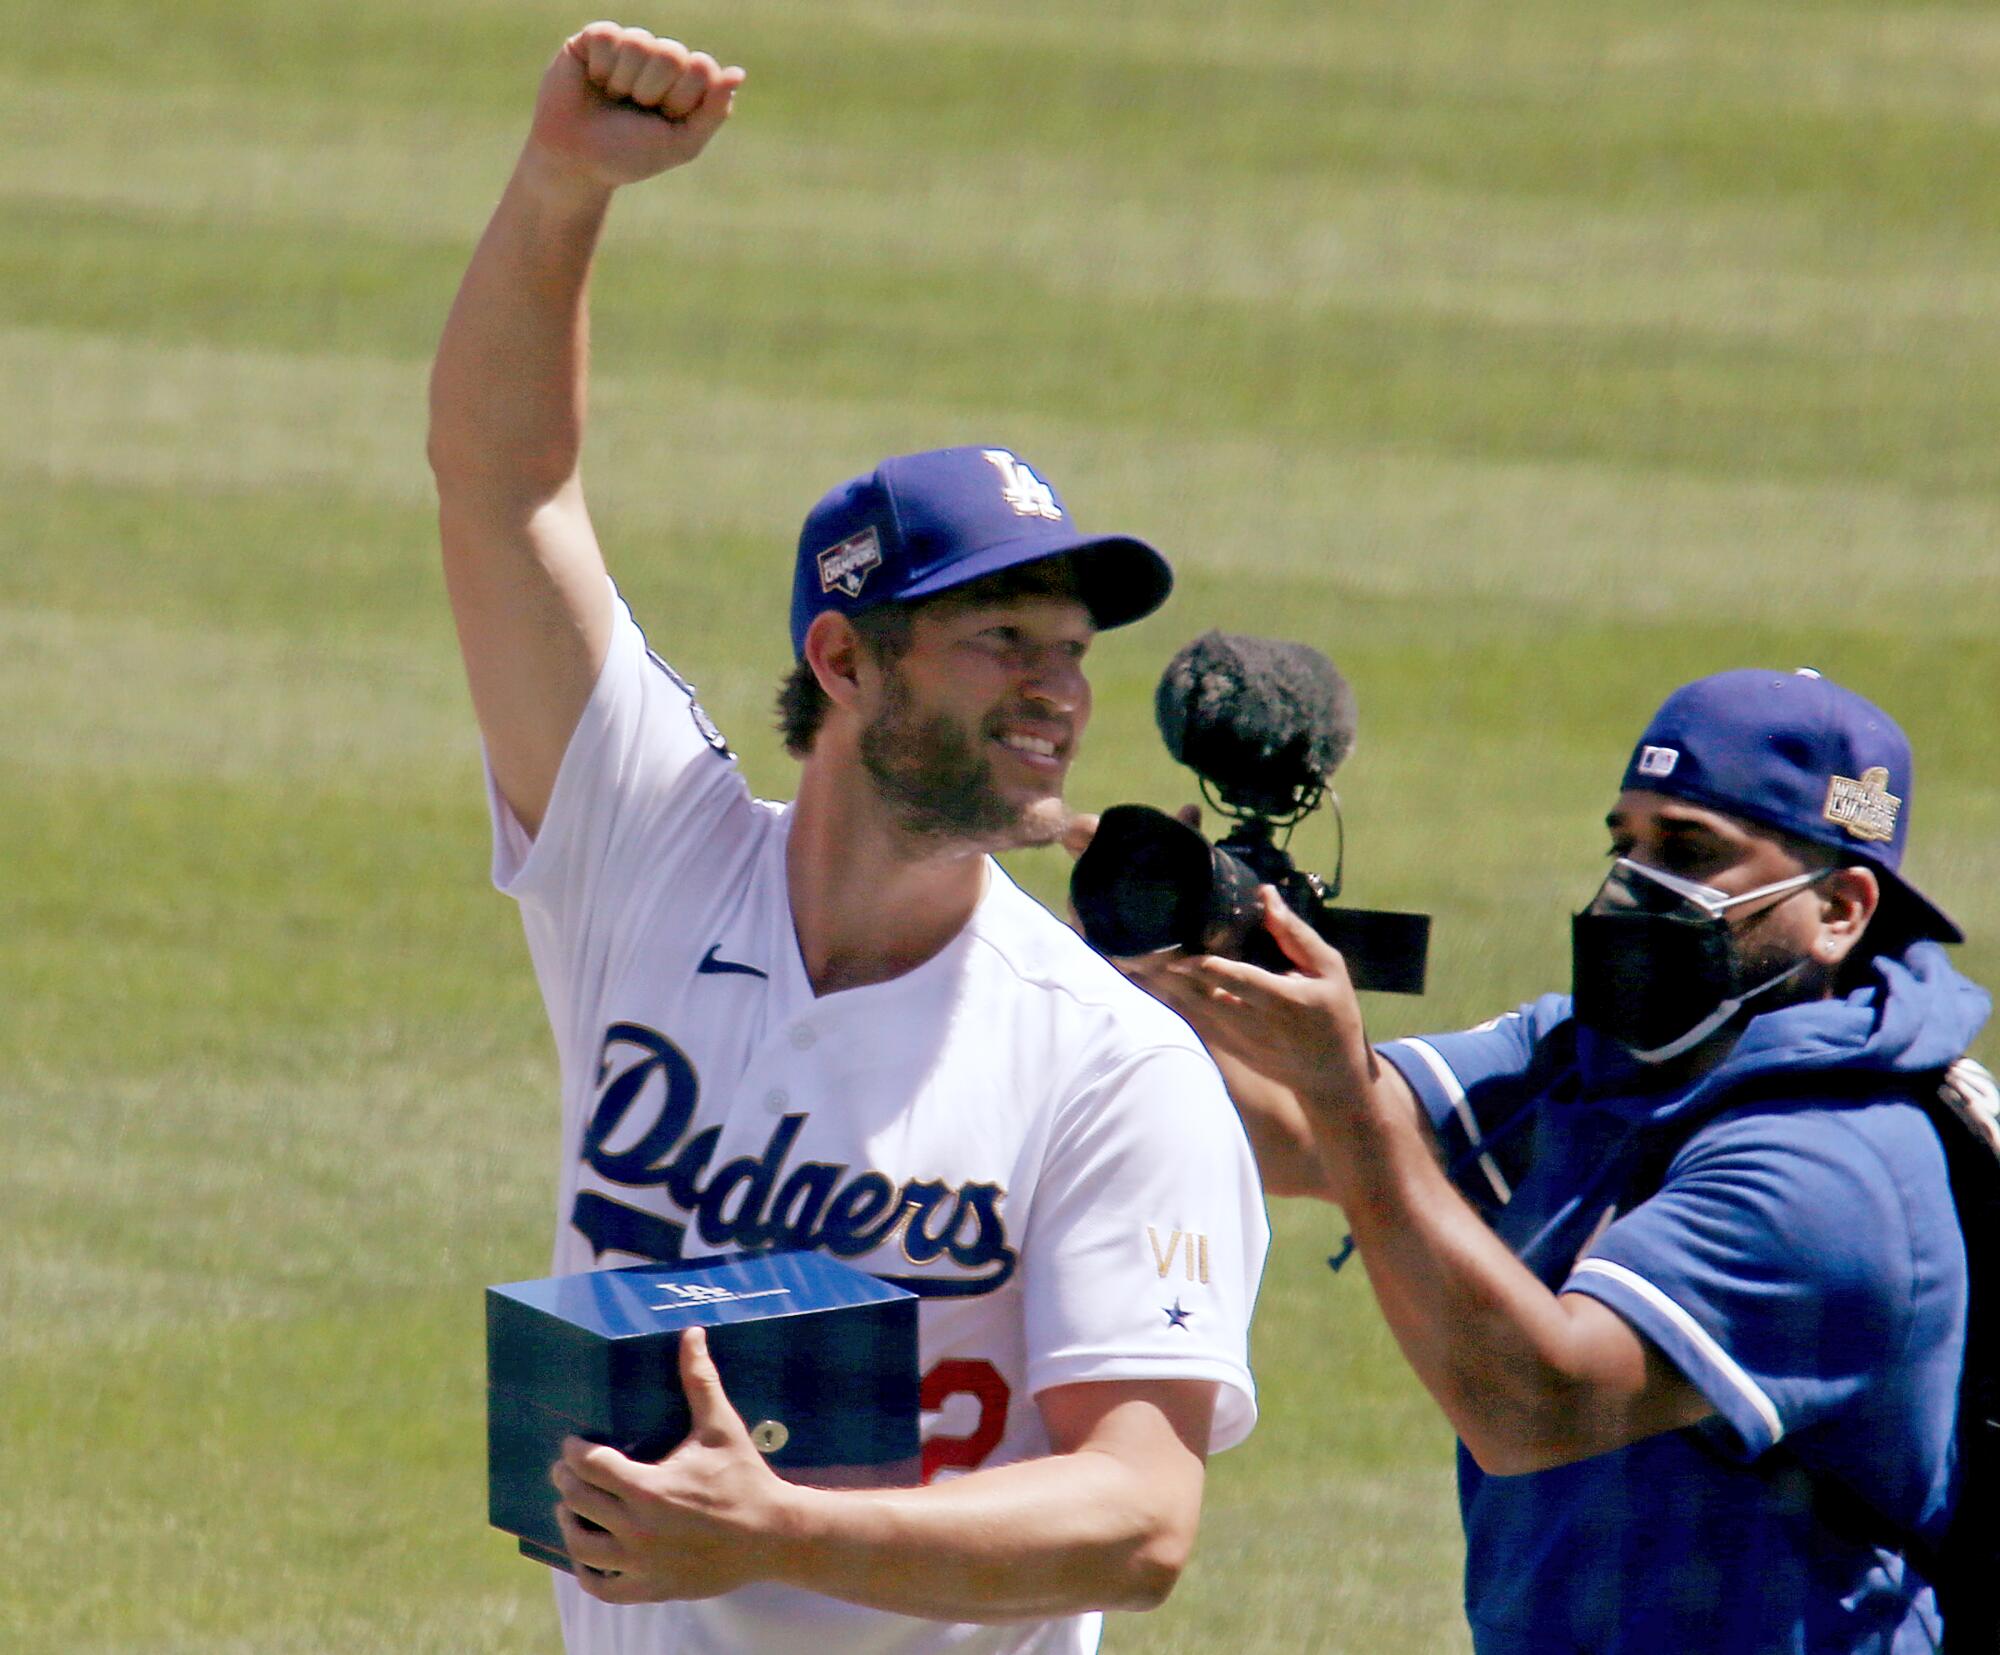 Dodgers pitcher Clayton Kershaw celebrates after getting his championship ring during a ceremomy.